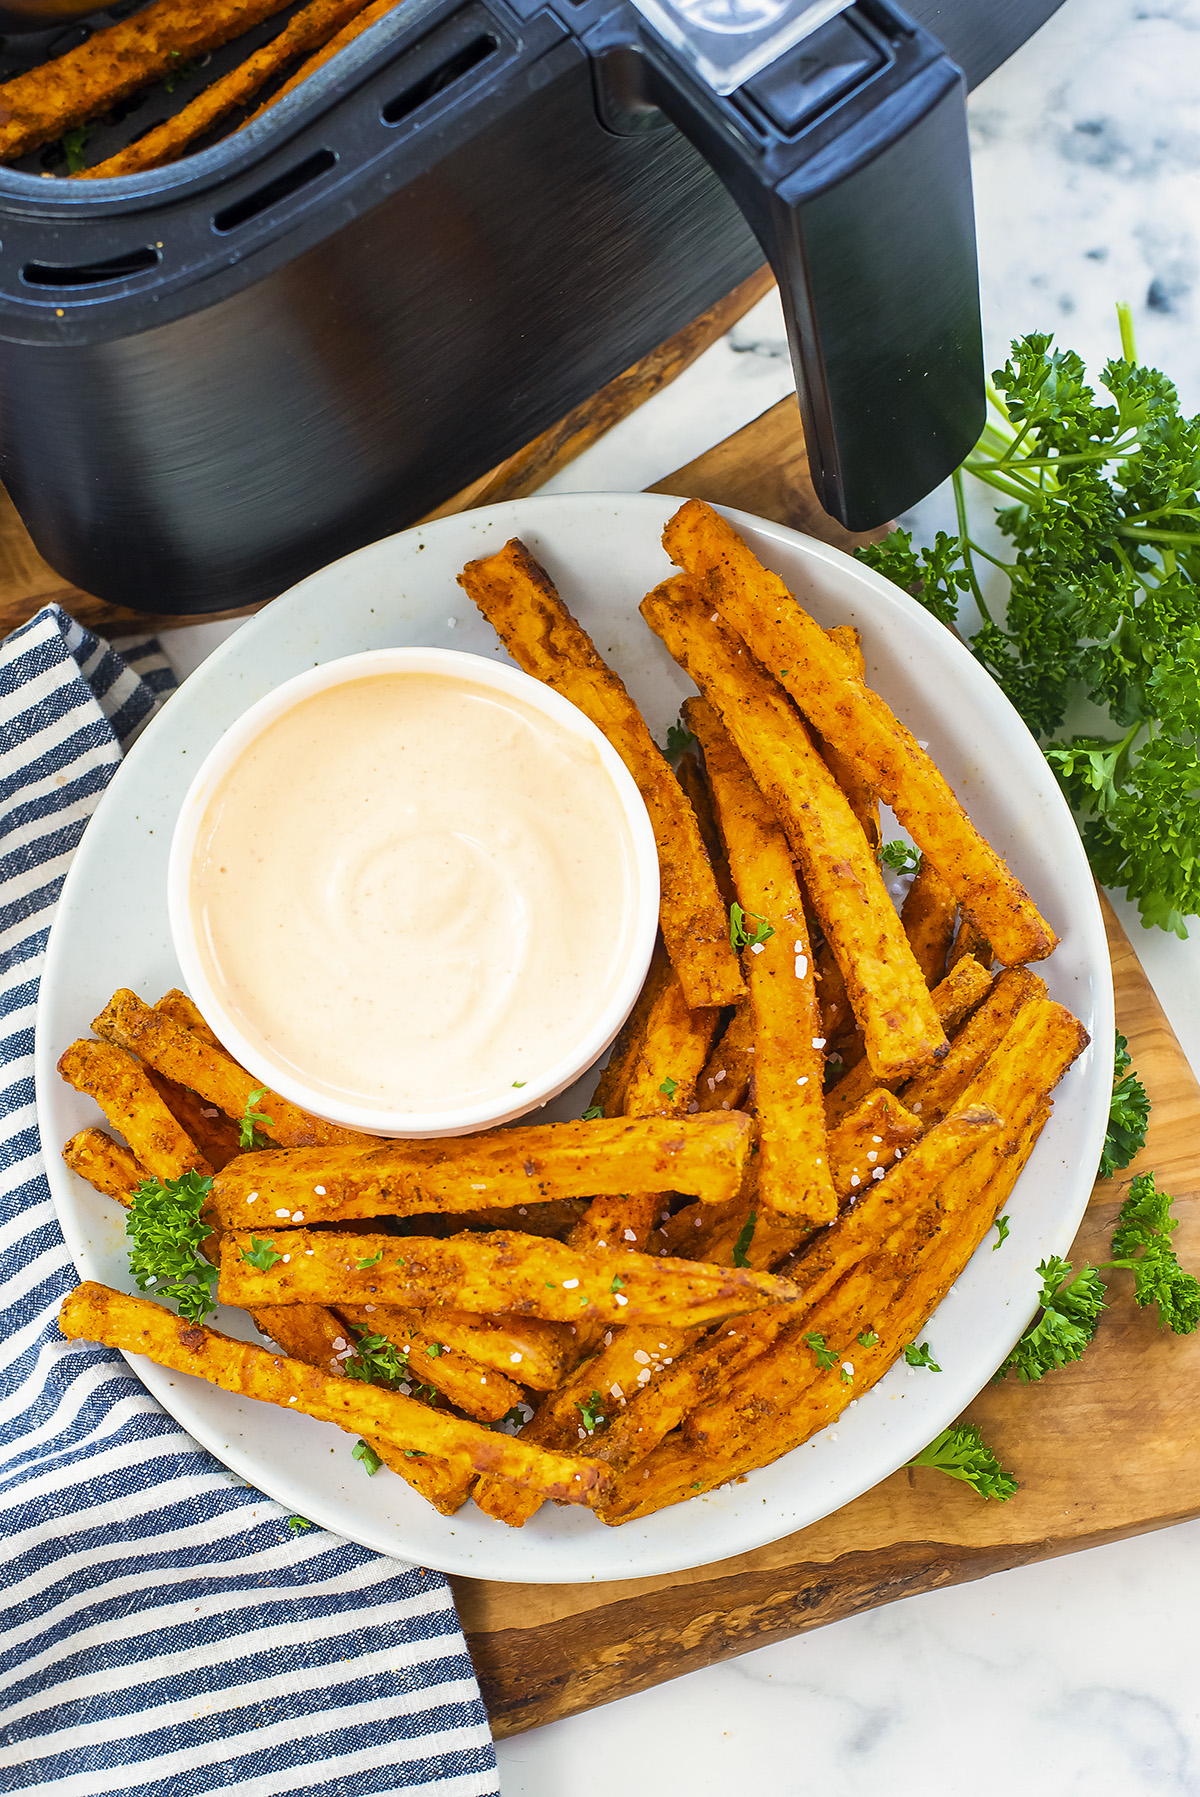 Overhead view of homemade sweet potato fries on plate with dip.